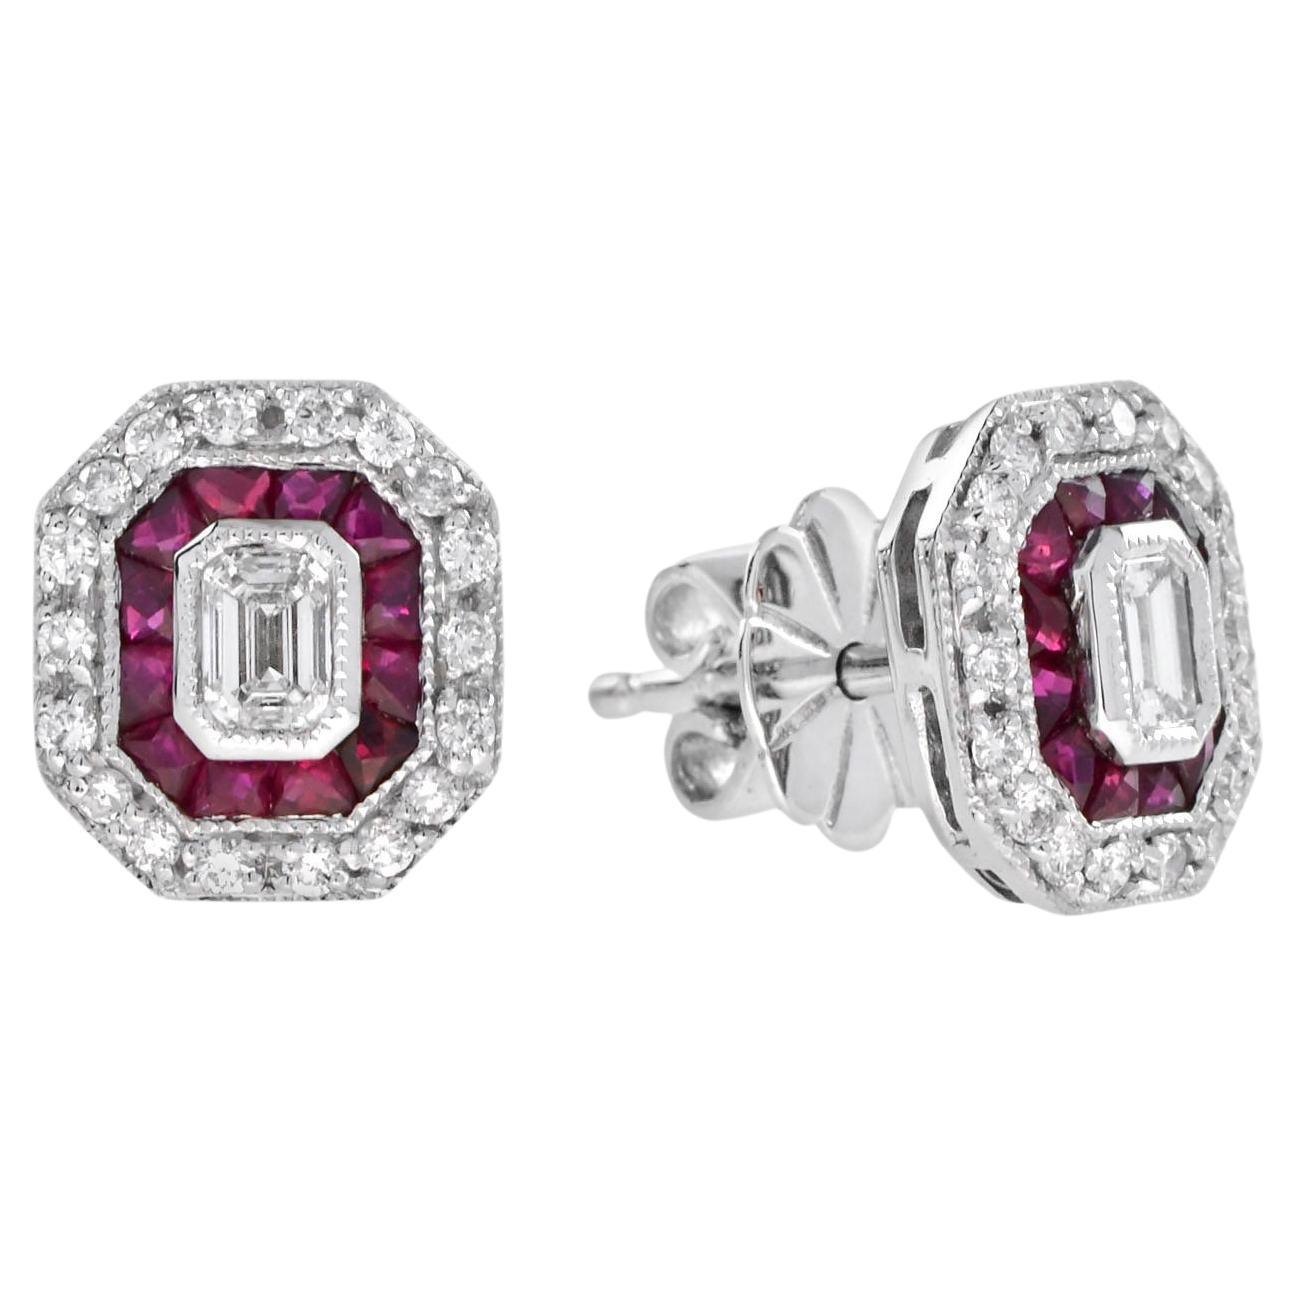 Art Deco Style Emerald Cut Diamond with Ruby Stud Earrings in 18K White Gold For Sale